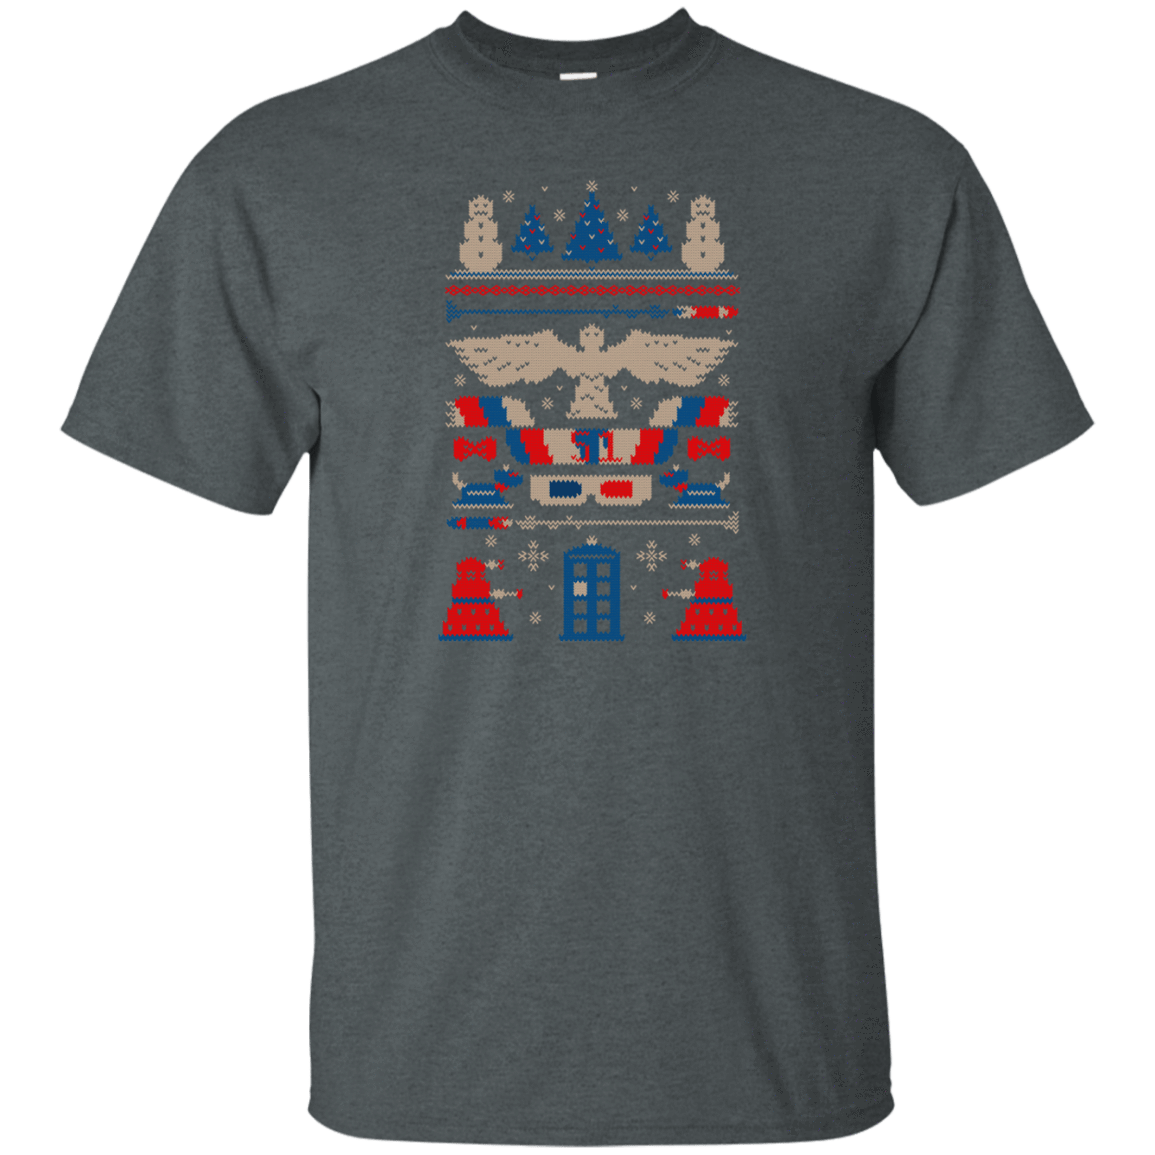 T-Shirts Dark Heather / Small Ugly Who Sweater T-Shirt